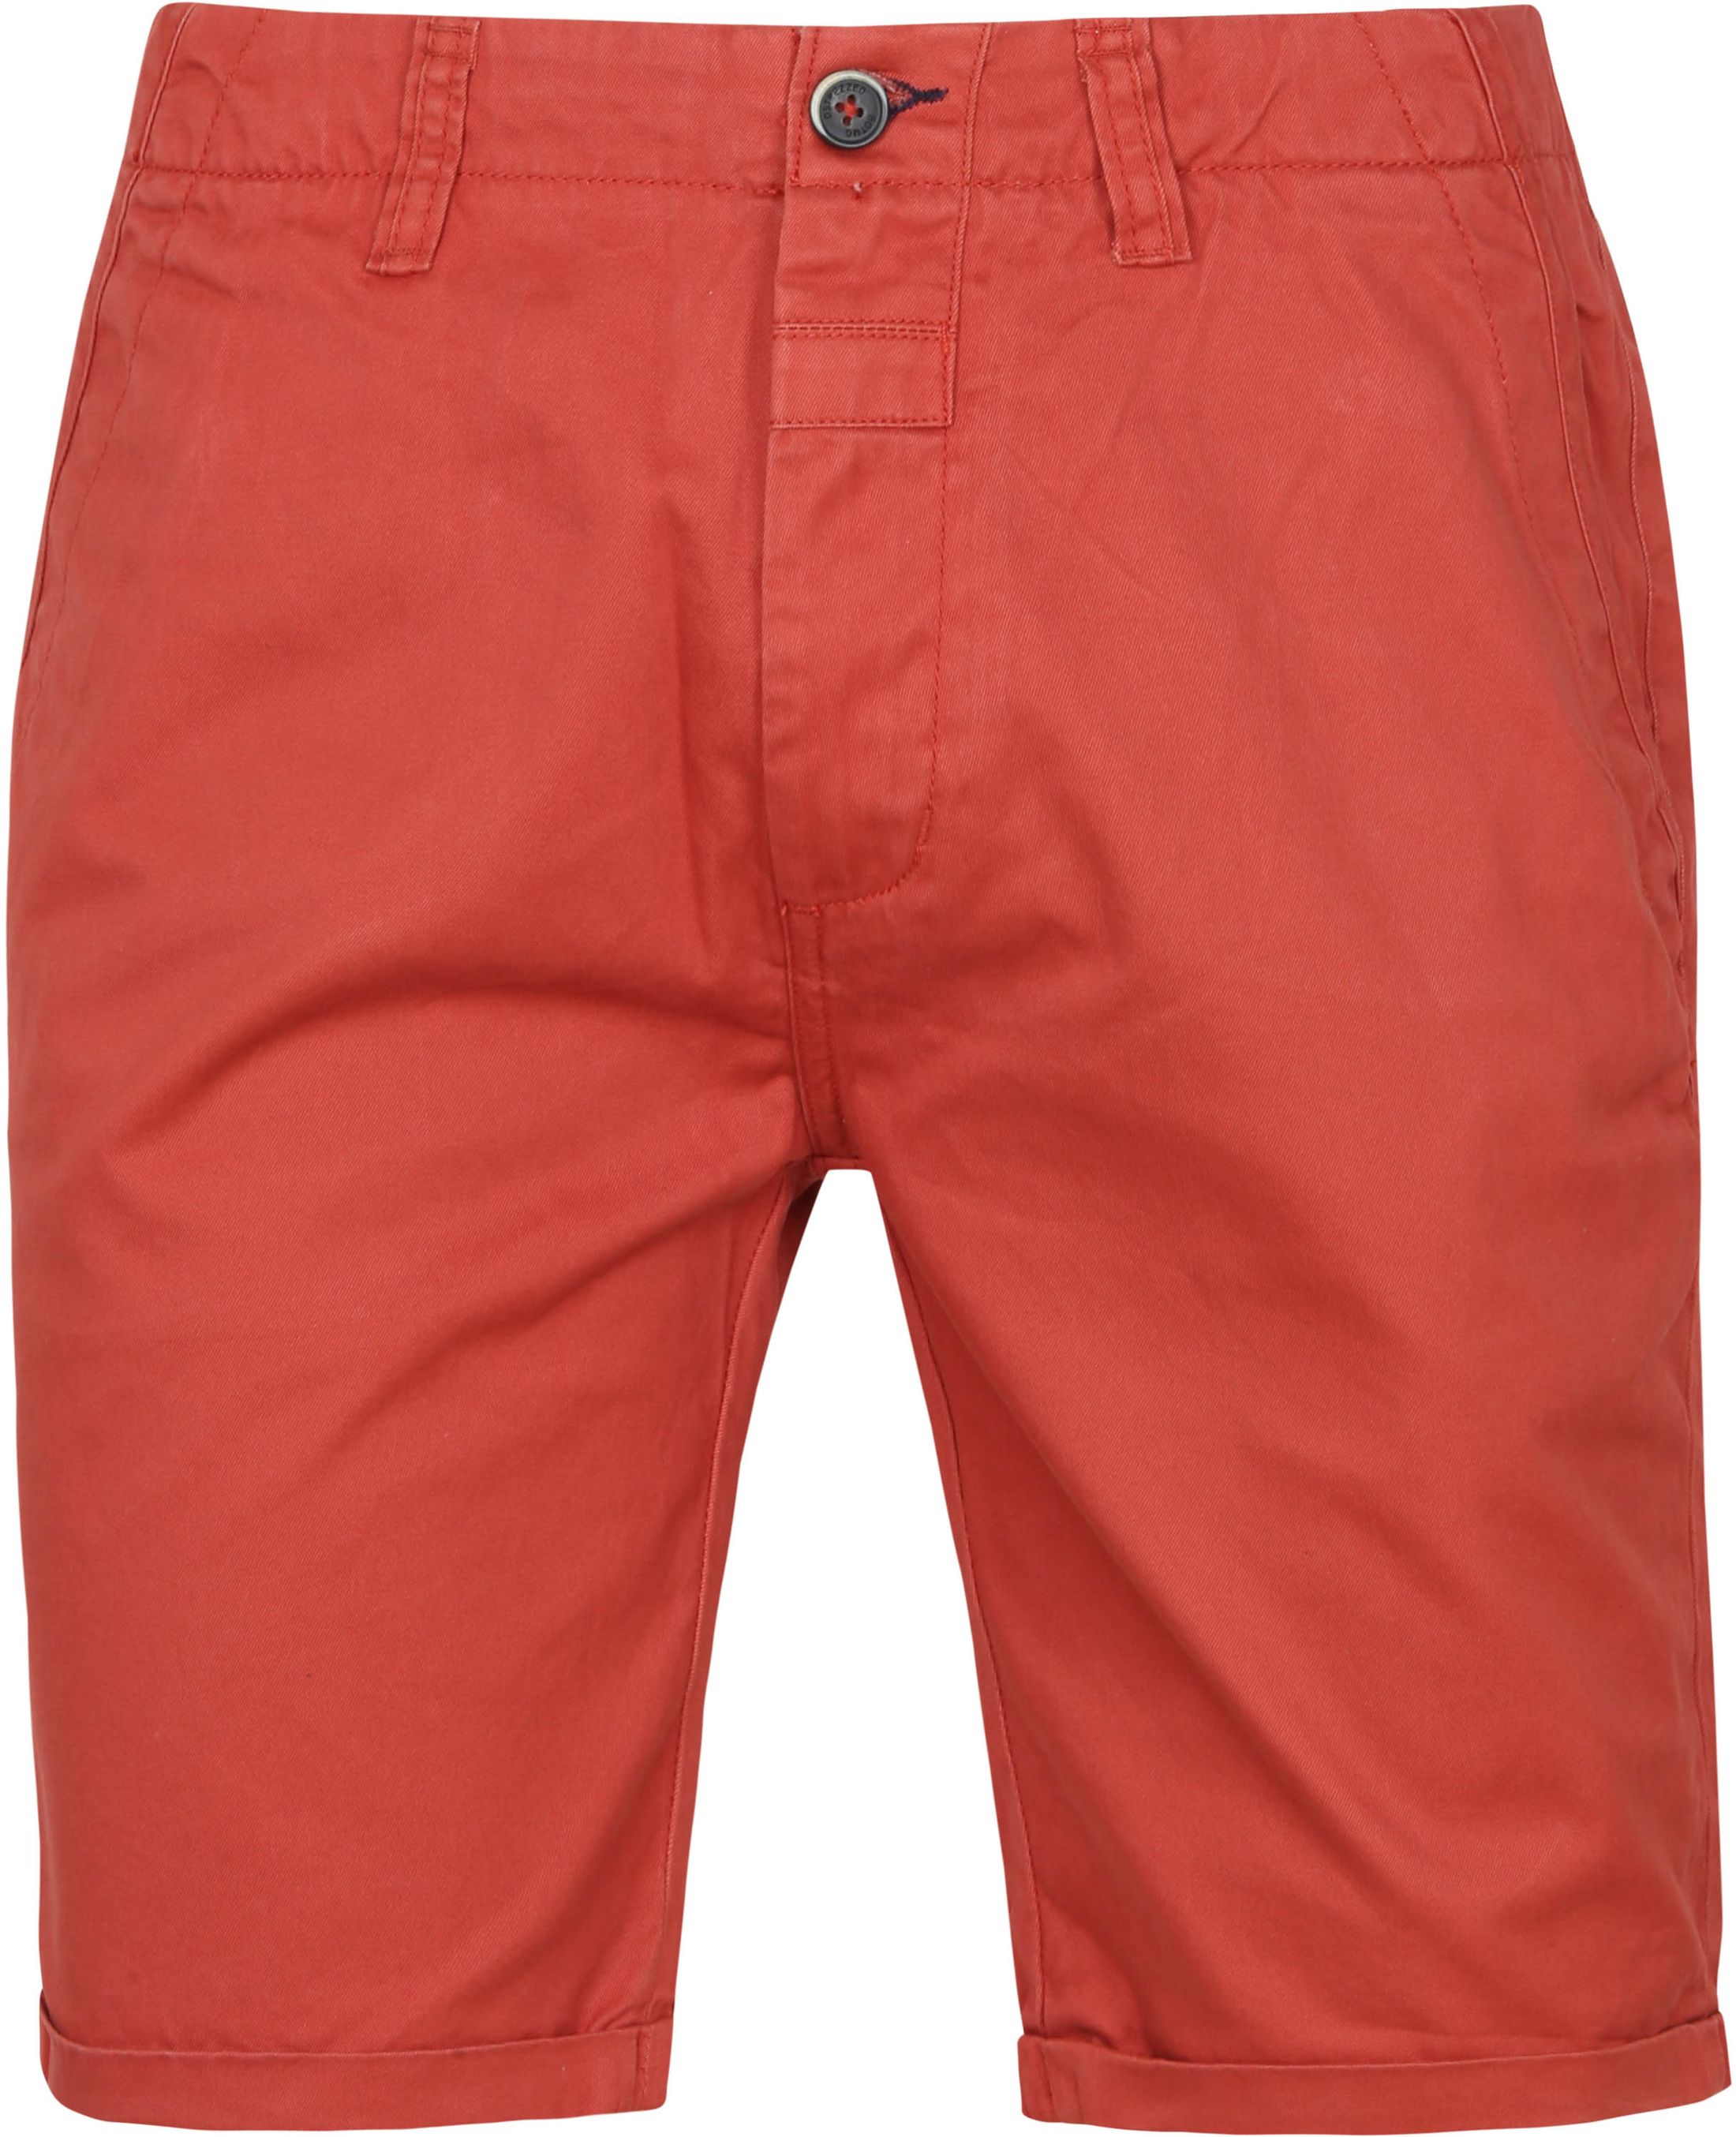 Dstrezzed Presley Chino Shorts Red size 32